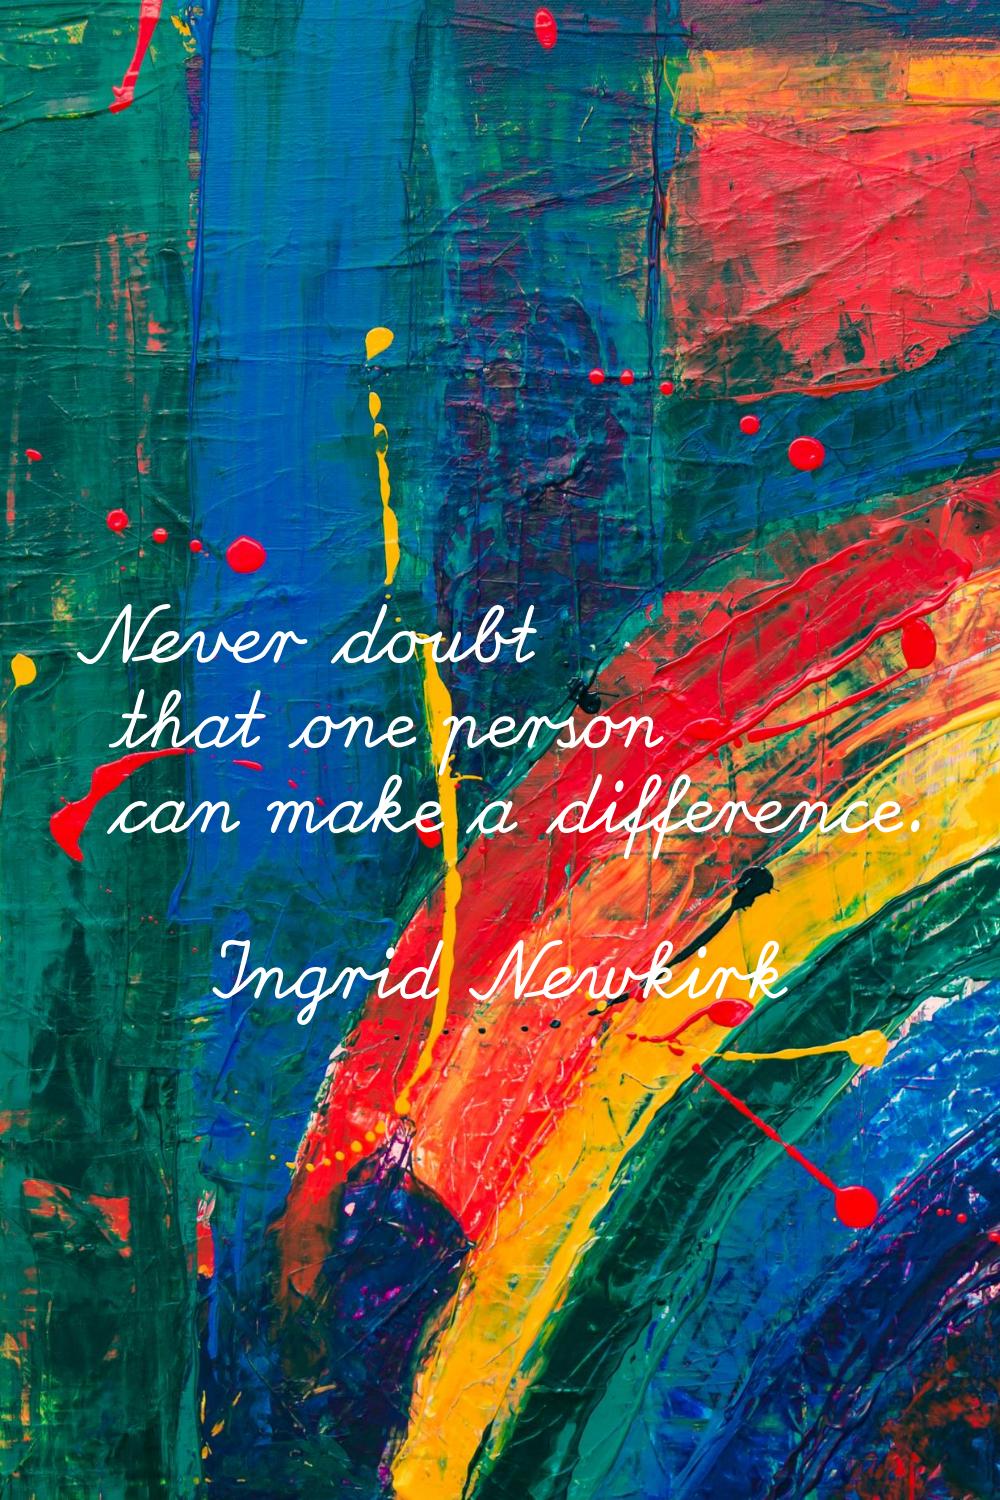 Never doubt that one person can make a difference.